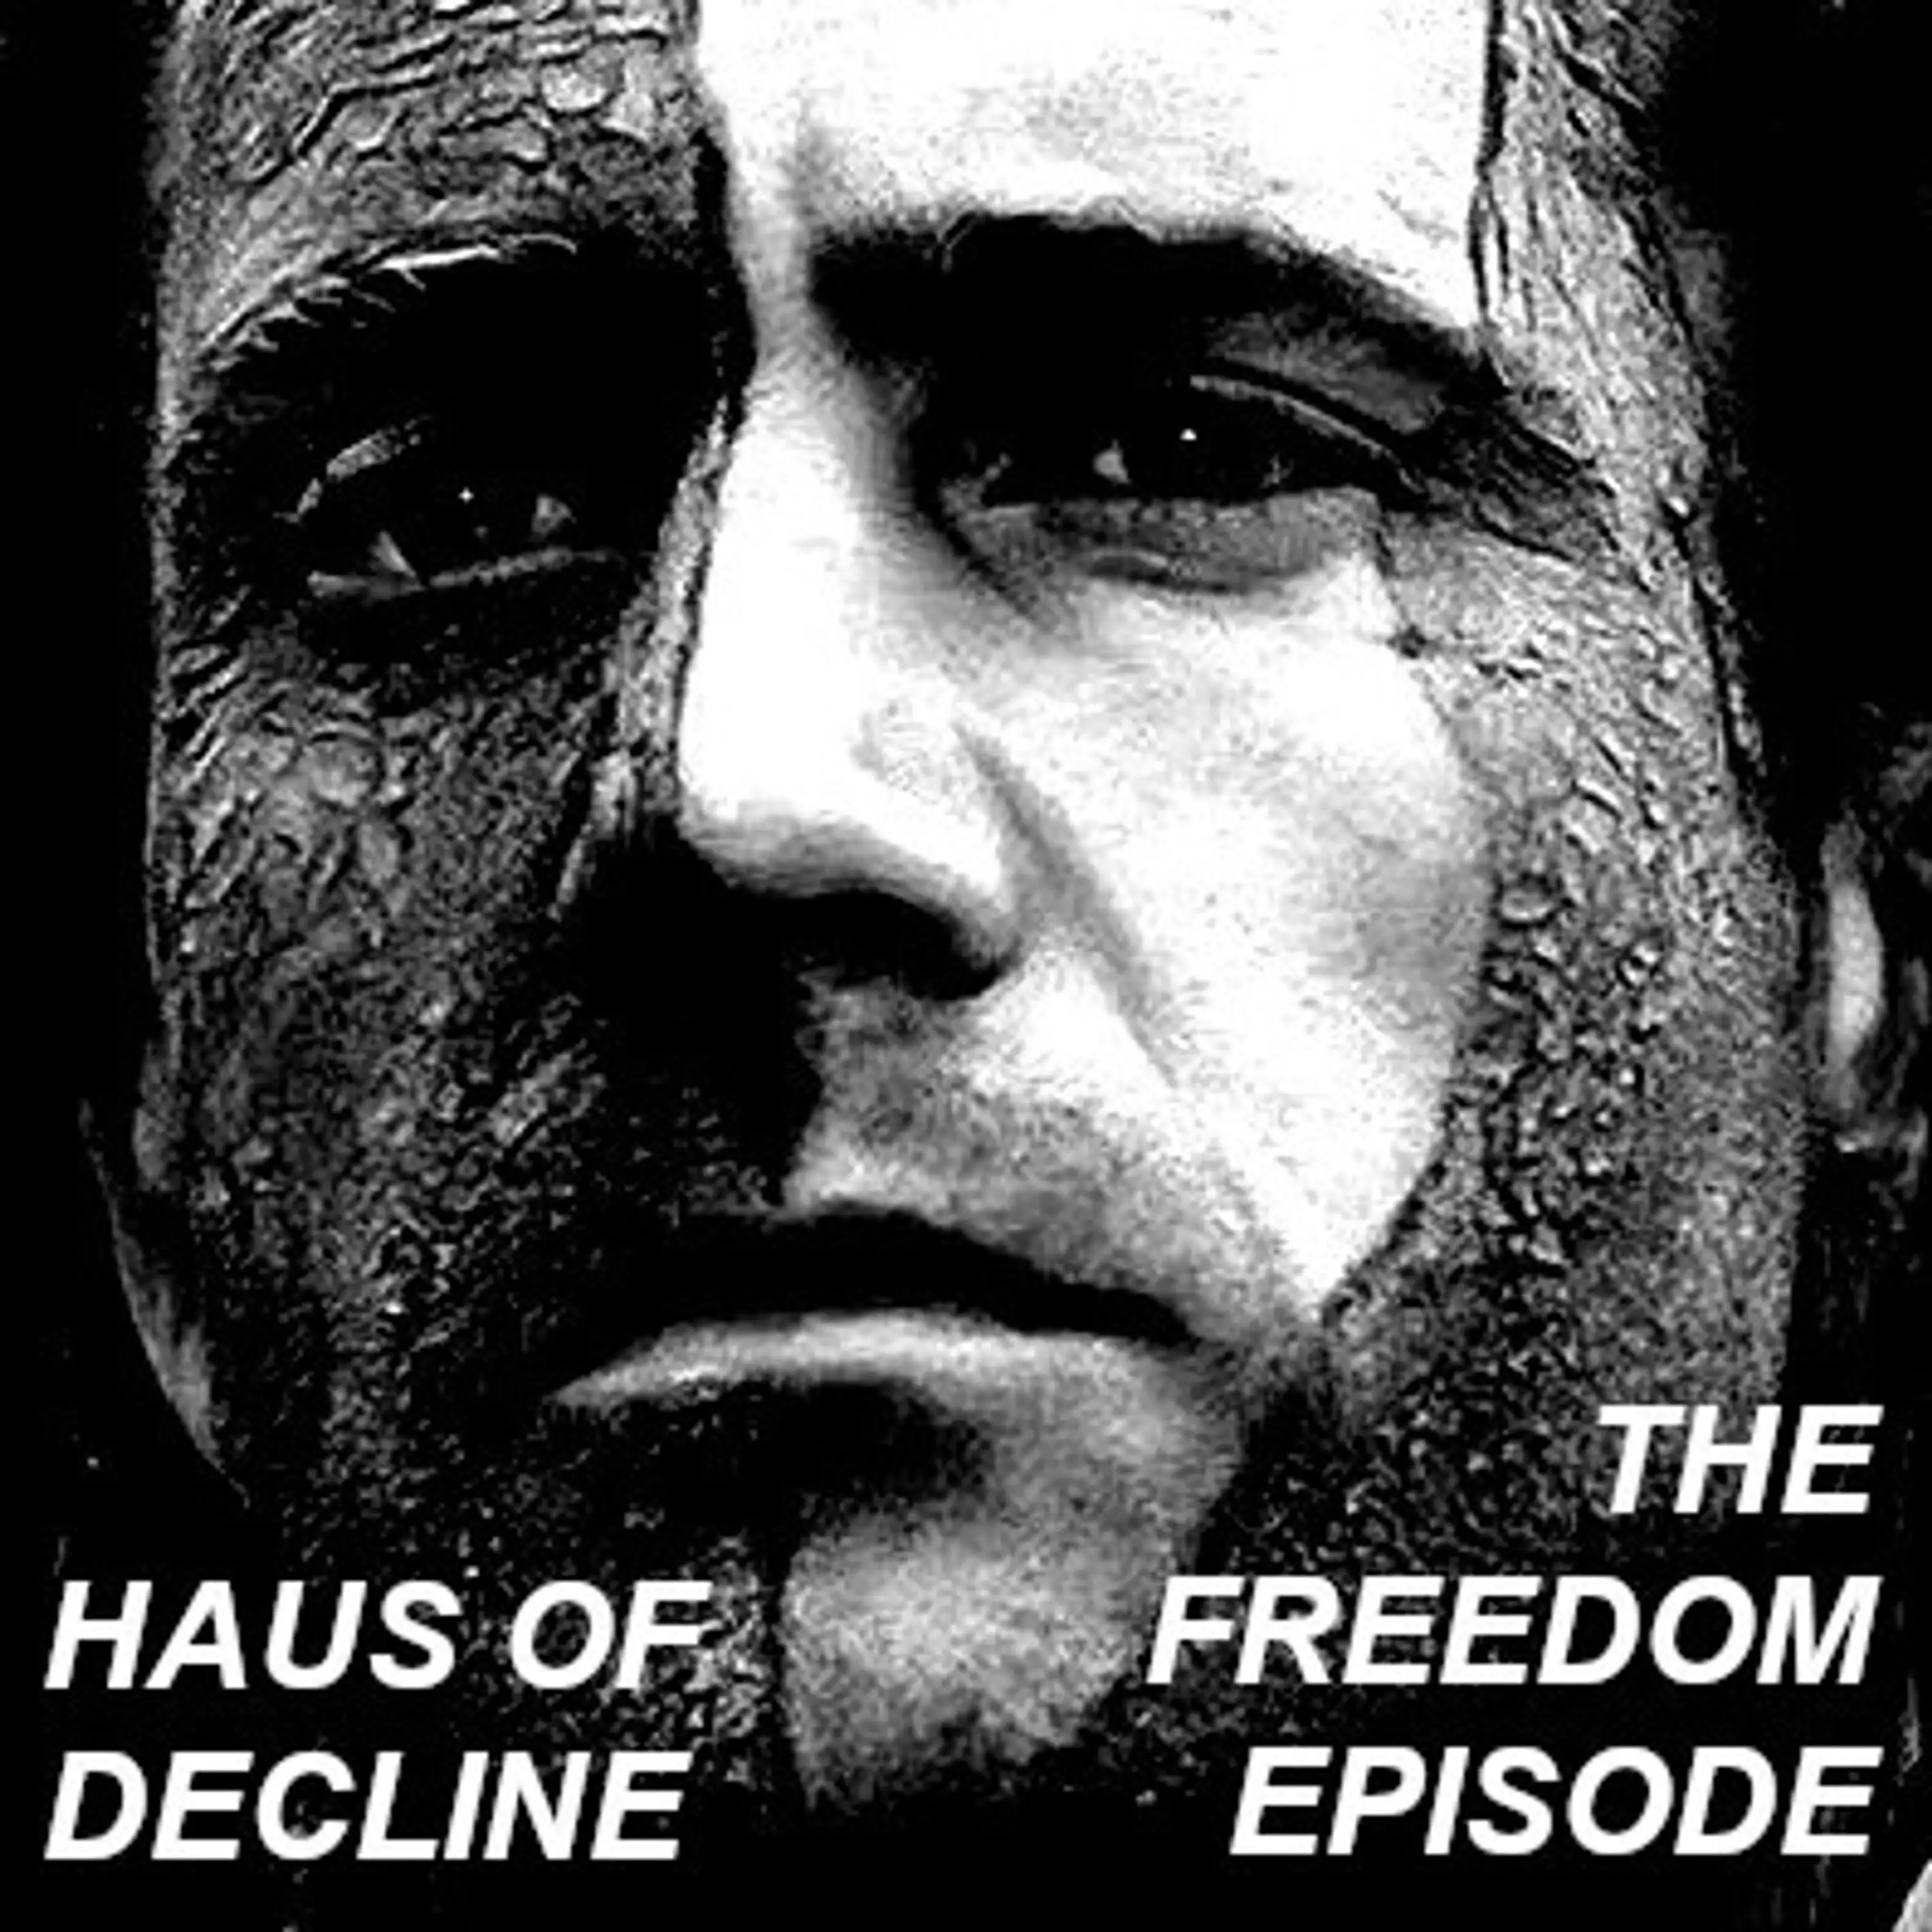 The Freedom Episode